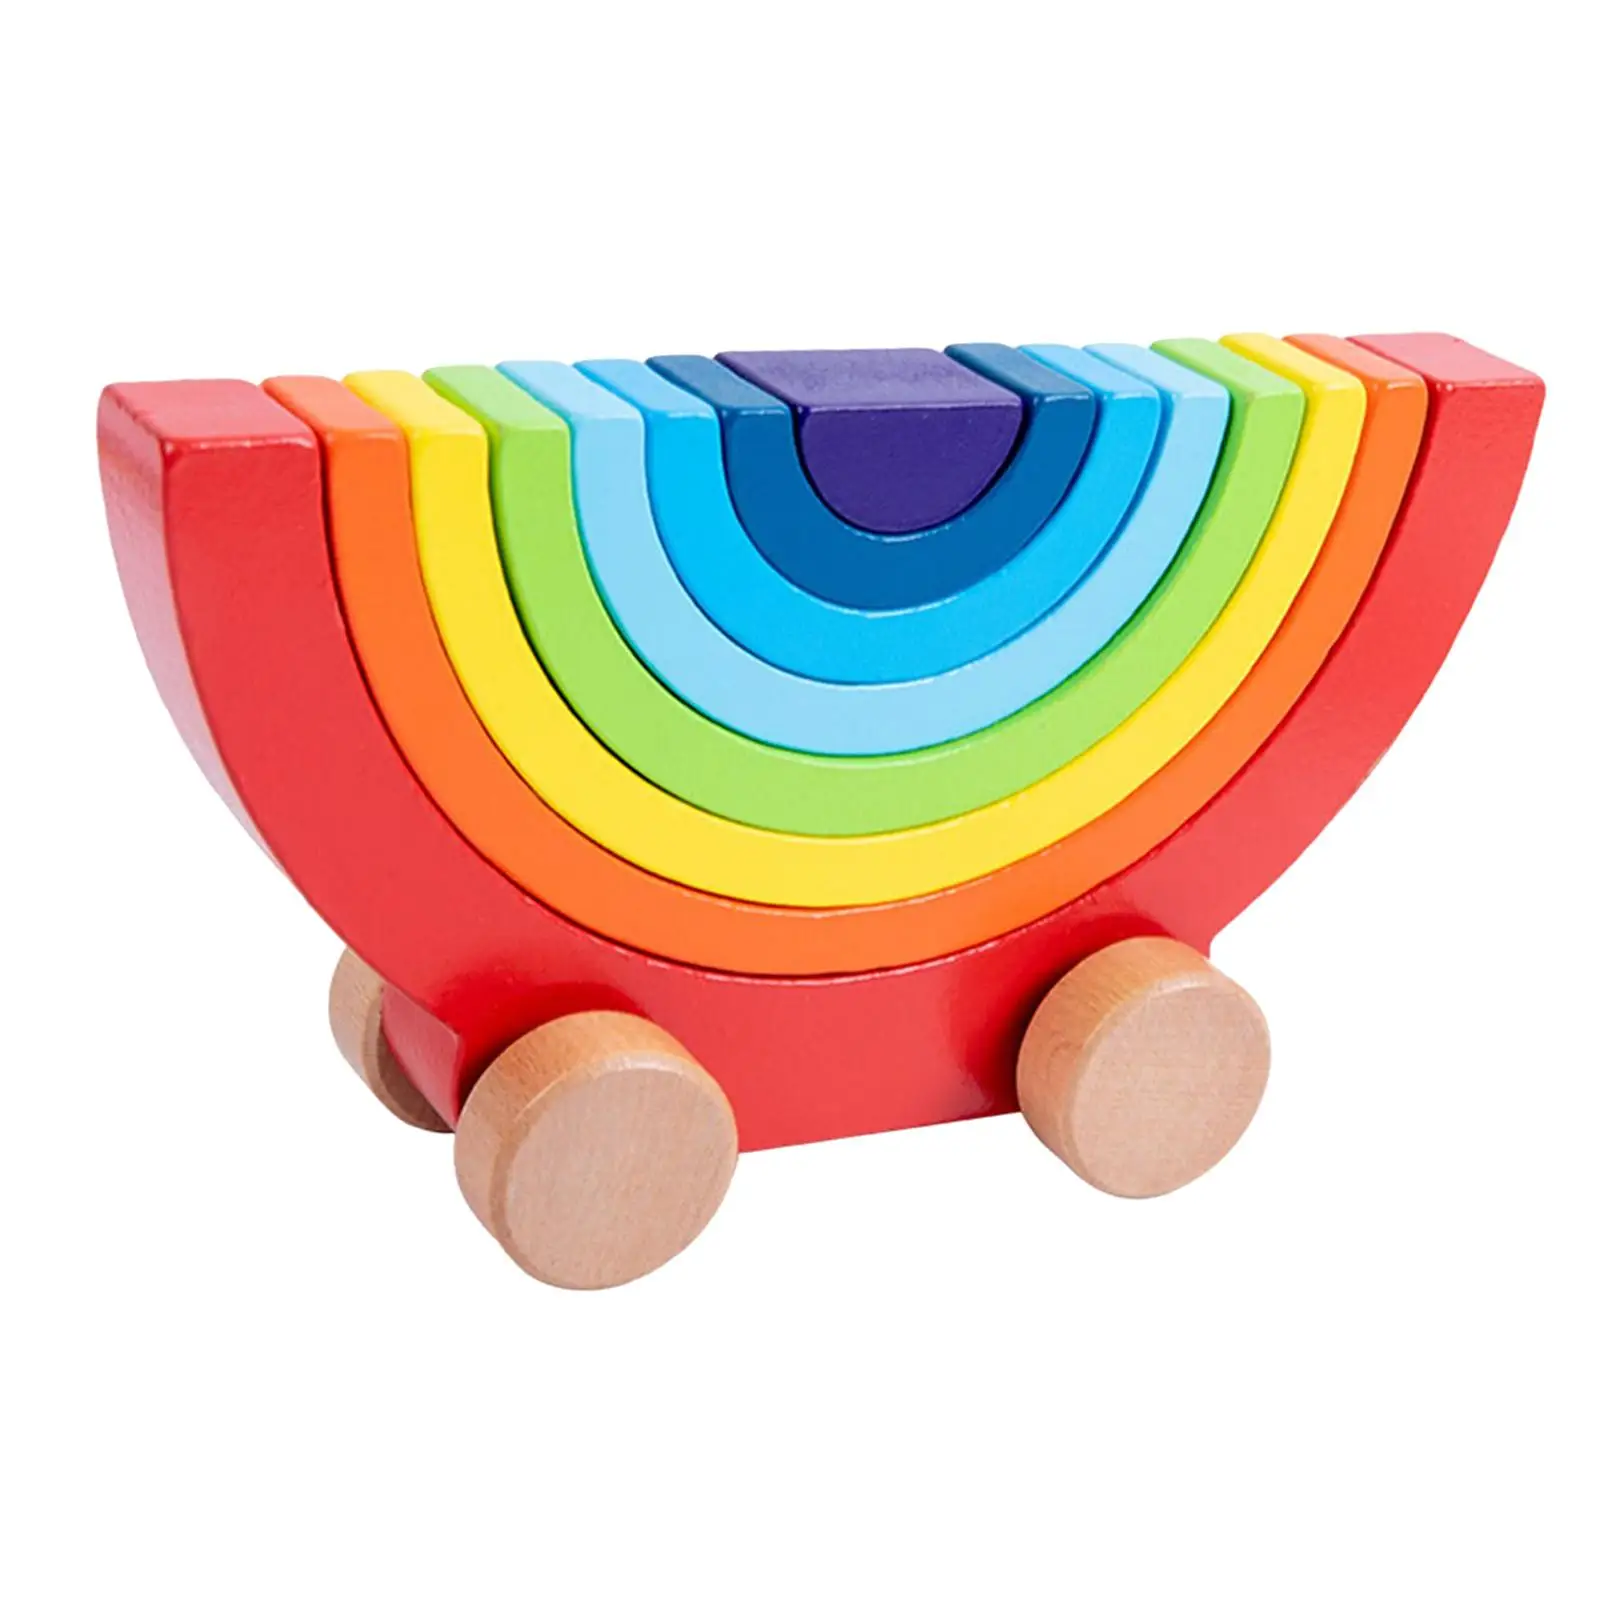 Wooden Building Blocks Car Toy Stackable Ornament Development Colorful Gift Stacker Creative Arch for Toddlers Children Teaching